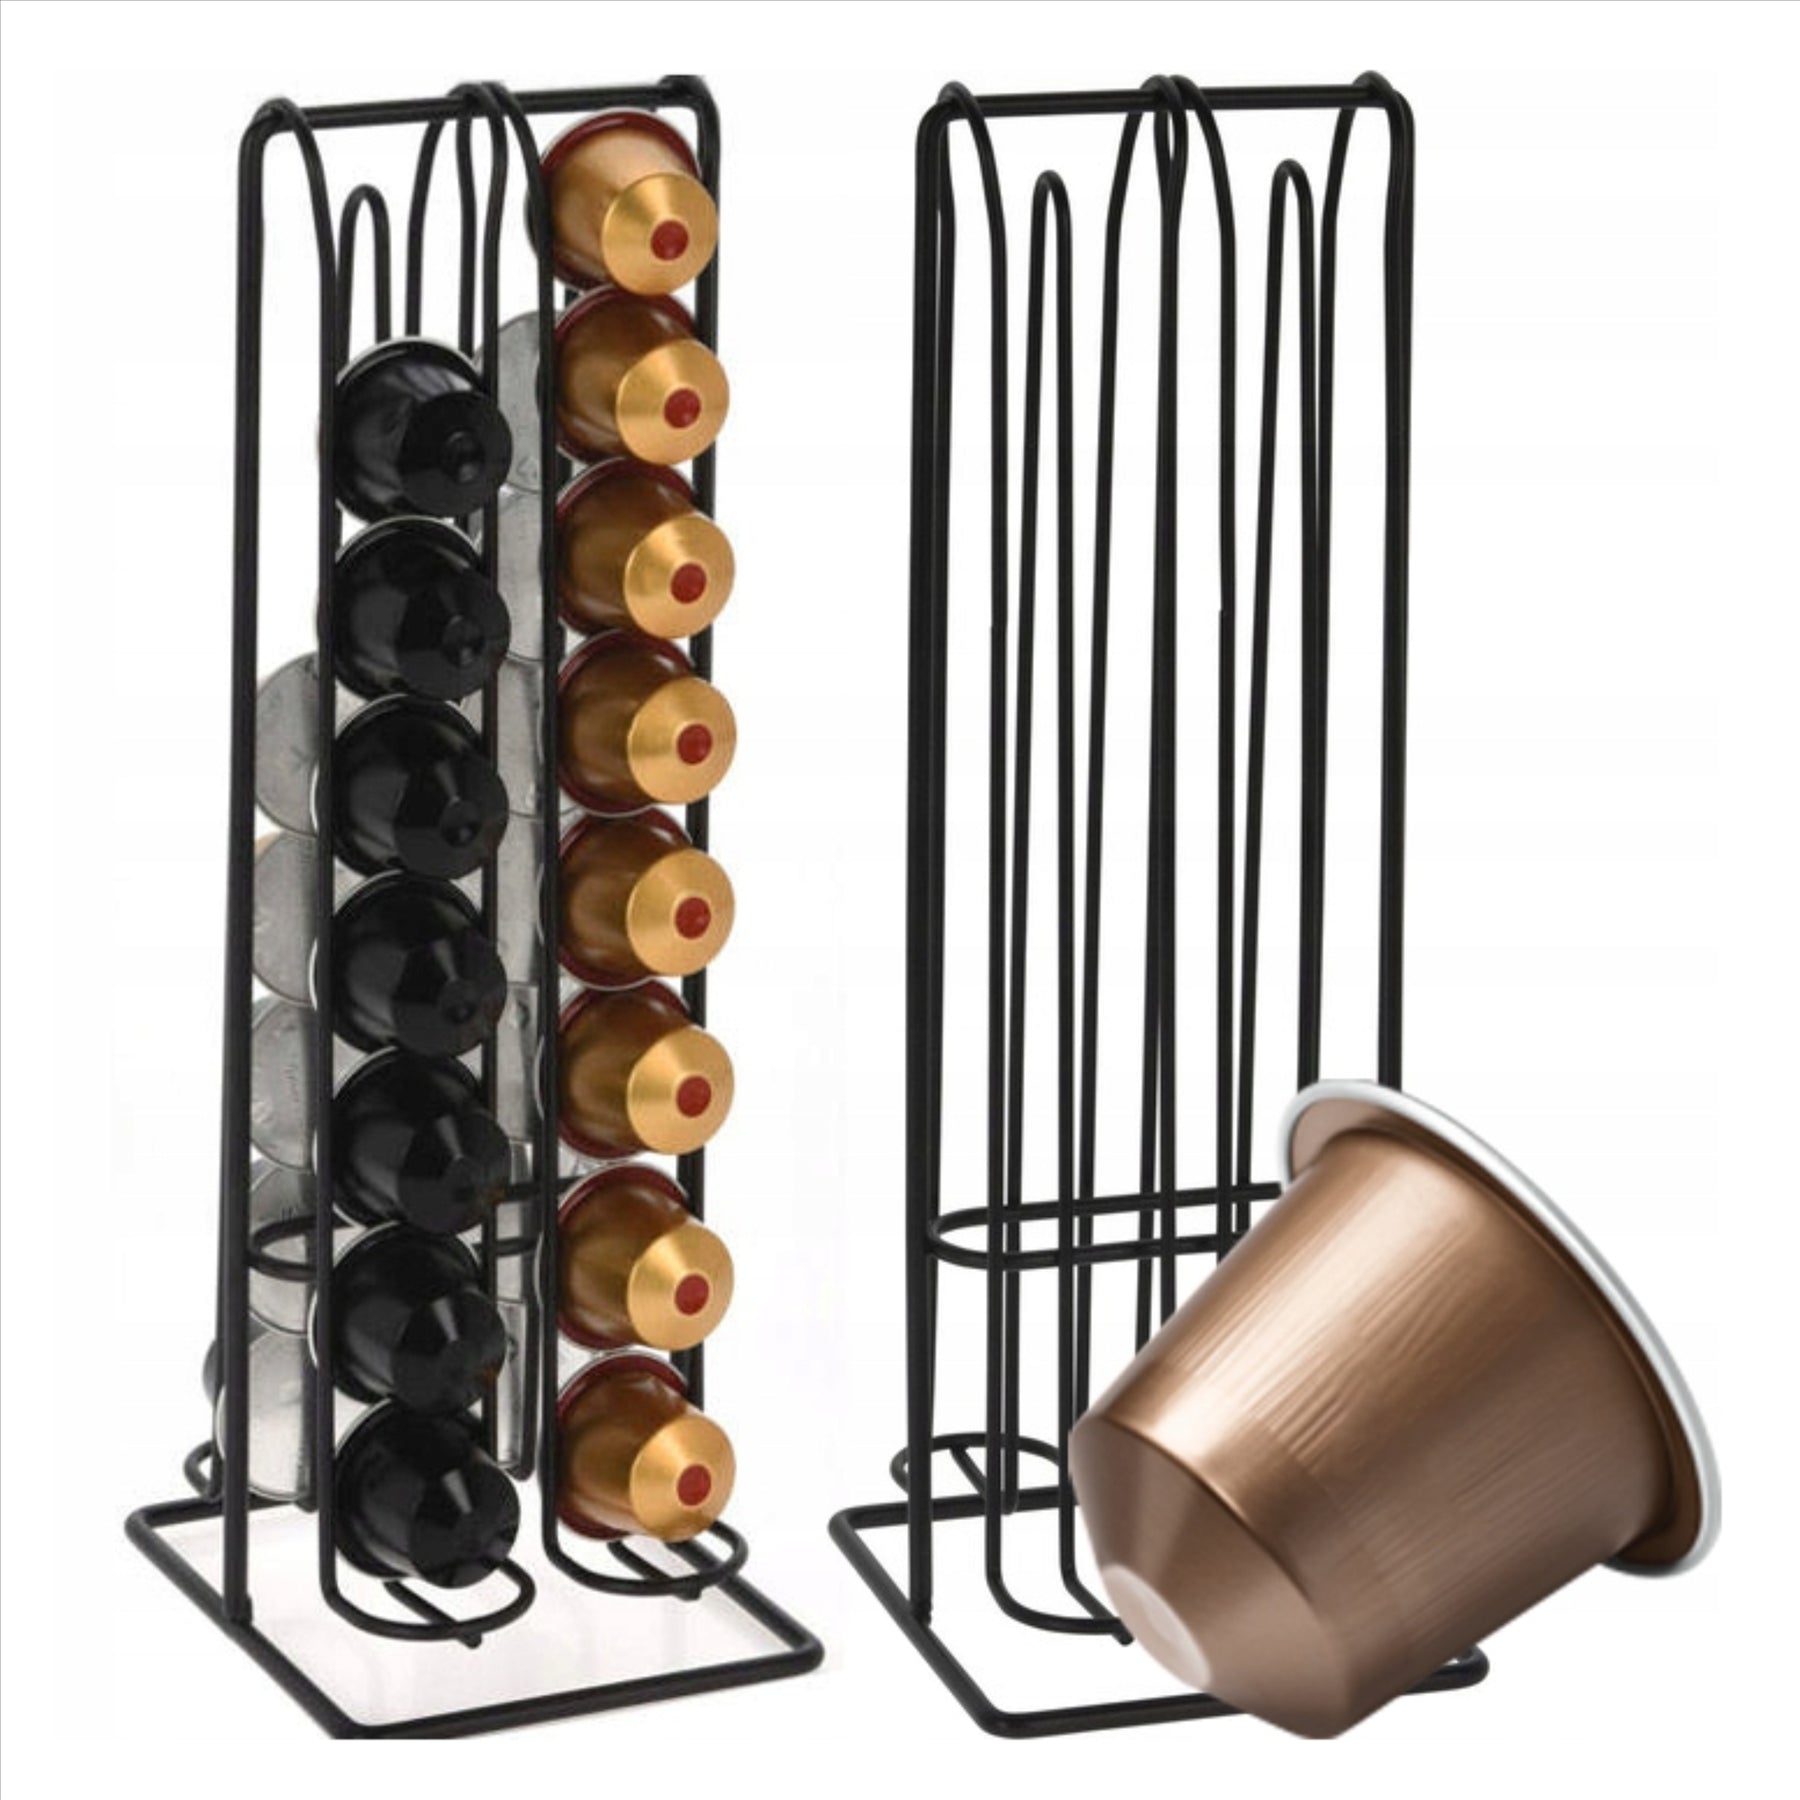 Coffee Capsules Pods Holder Kitchen Organizer by Geezy - The Magic Toy Shop